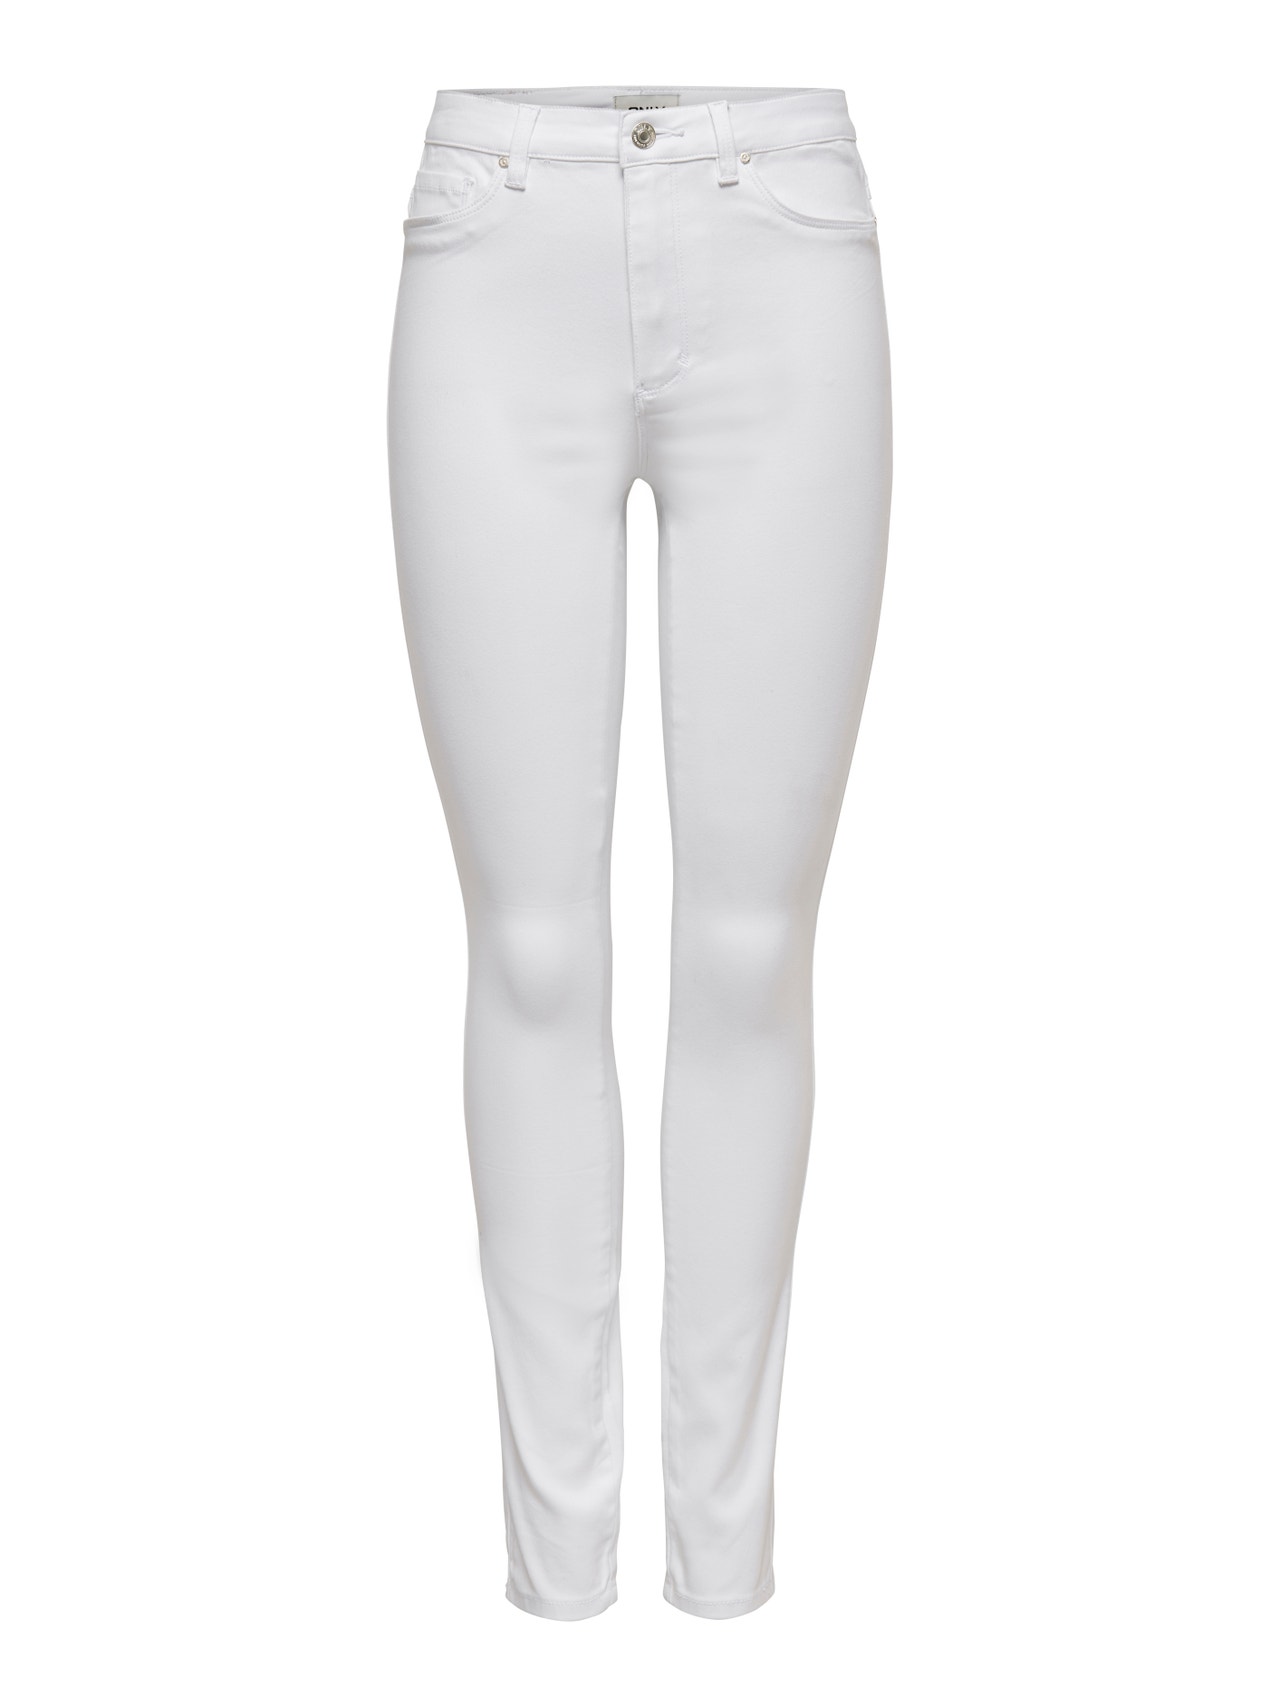 ONLY Skinny Fit High waist Jeans -White - 15174842